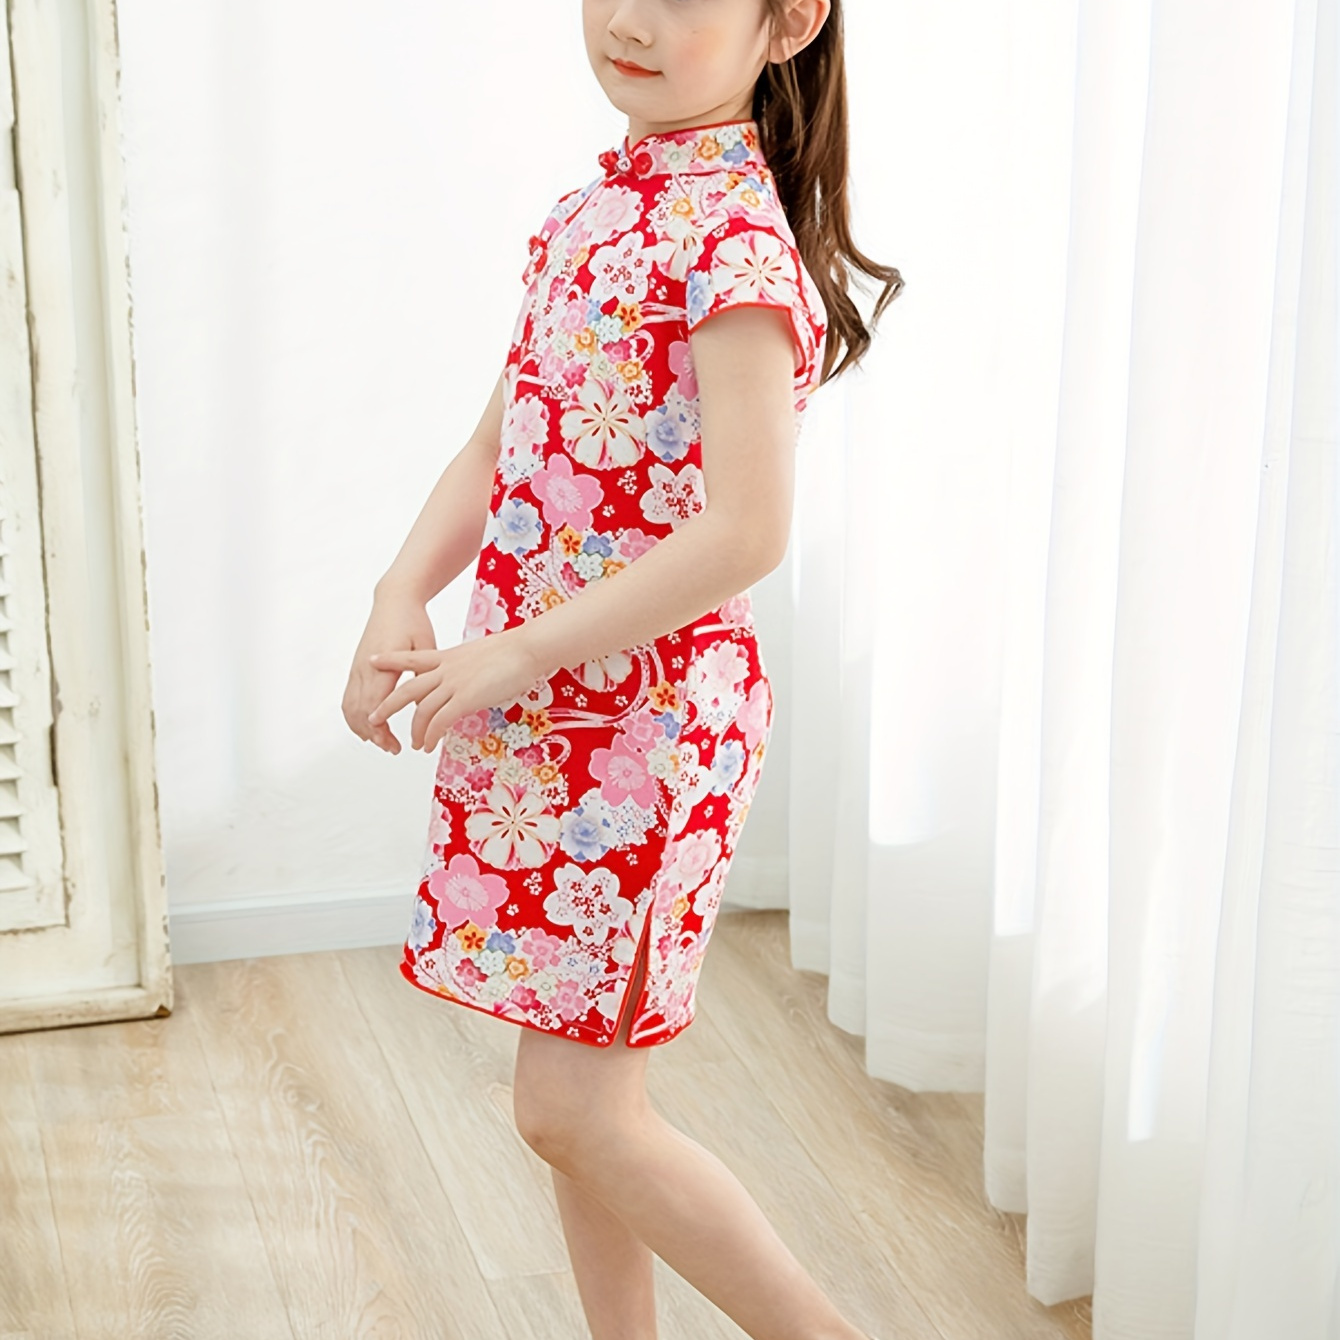 

100% Cotton Girls Short Sleeve Flower Print Chinese Qipao Dress Party Gift (chinese Size, Please Check The Size Guide Carefully)